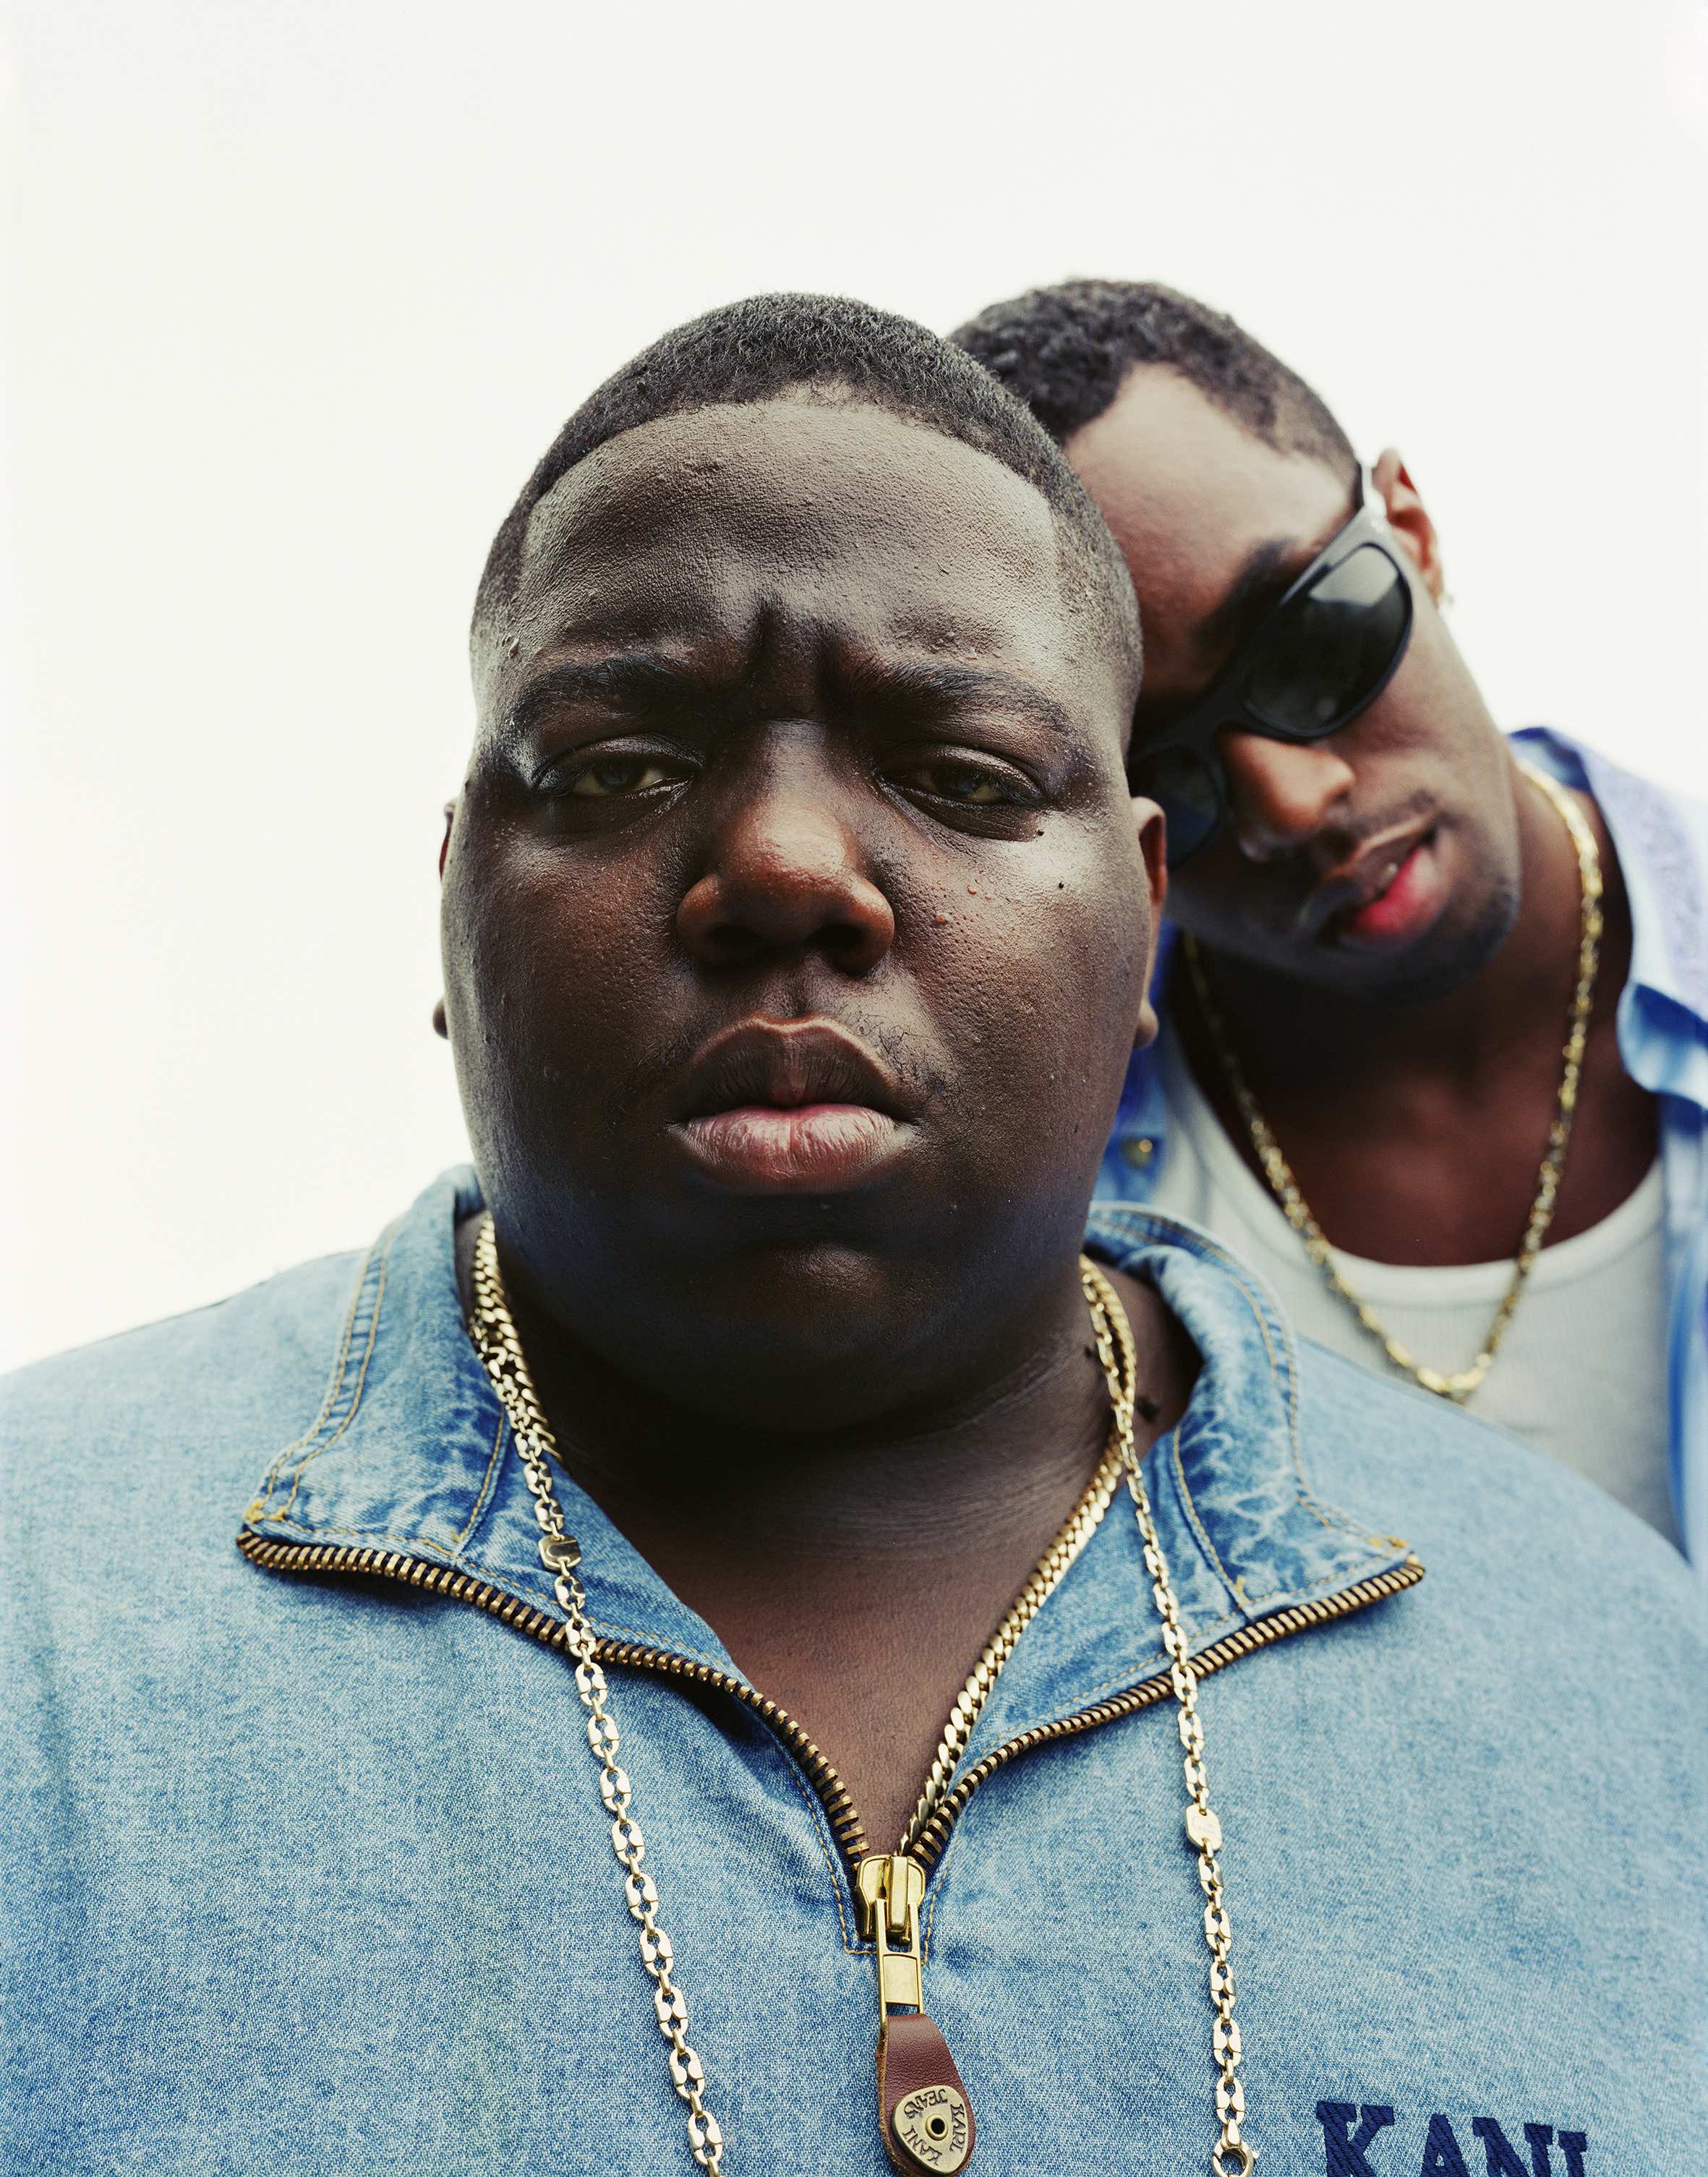 Street Dreams, Kunsthal | Dana Lixenberg, Christopher Wallace (Biggie) & Sean Combs (Puff Daddy), 1996, Cover image VIBE September 1996 issue. Foto ©Dana Lixenberg. Courtesy of the artist and GRIMM Amsterdam, New York